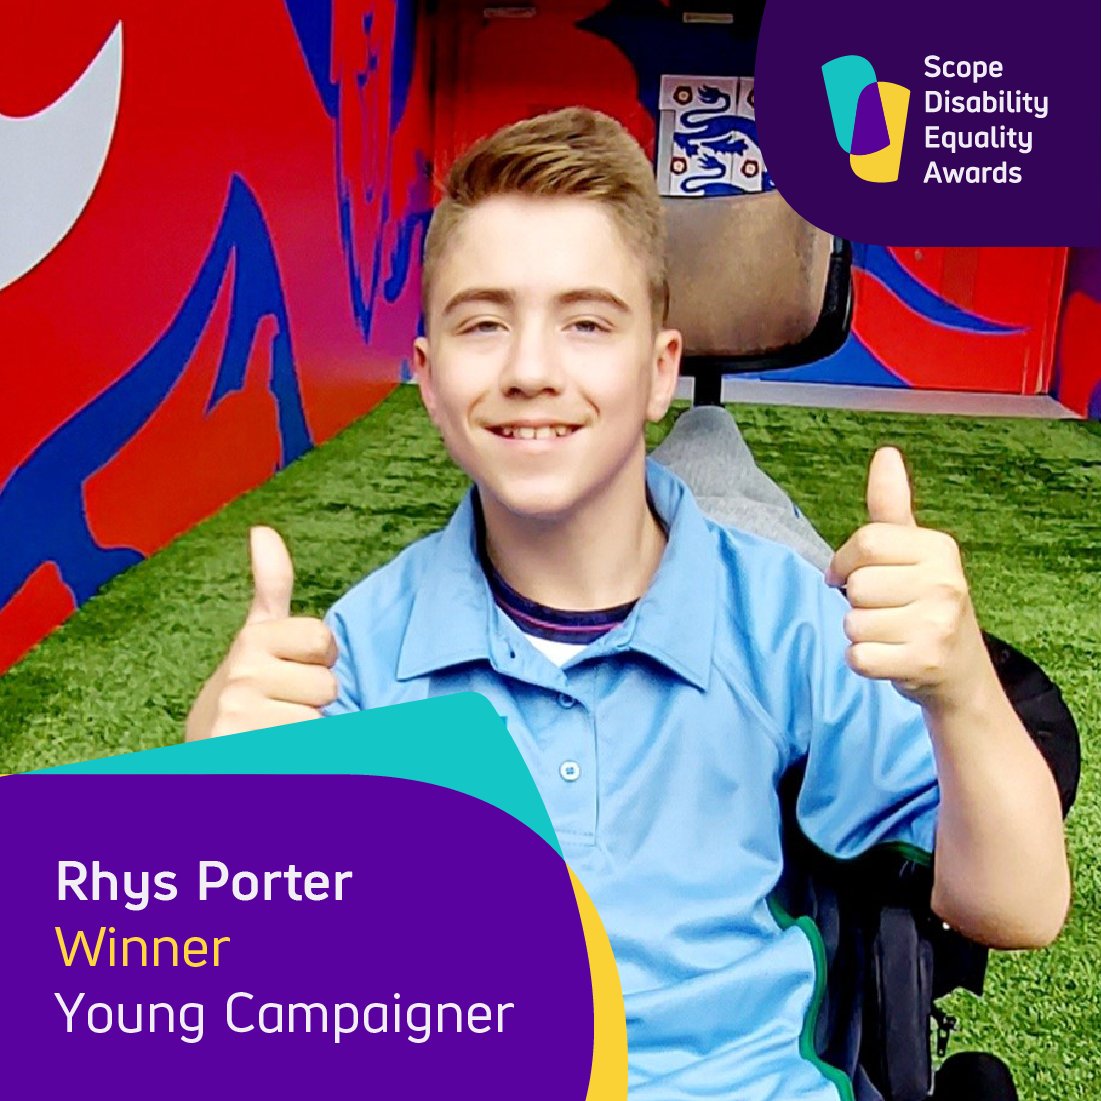 🏆 Rhys Porter has won our Young Campaigner award! Determined to overcome online trolls, @RhysPorter__ raised over £20,000 in support of disabled people and their families. Rhys’ work to challenge attitudes is outstanding. He demonstrates the power of young campaigners 🙌